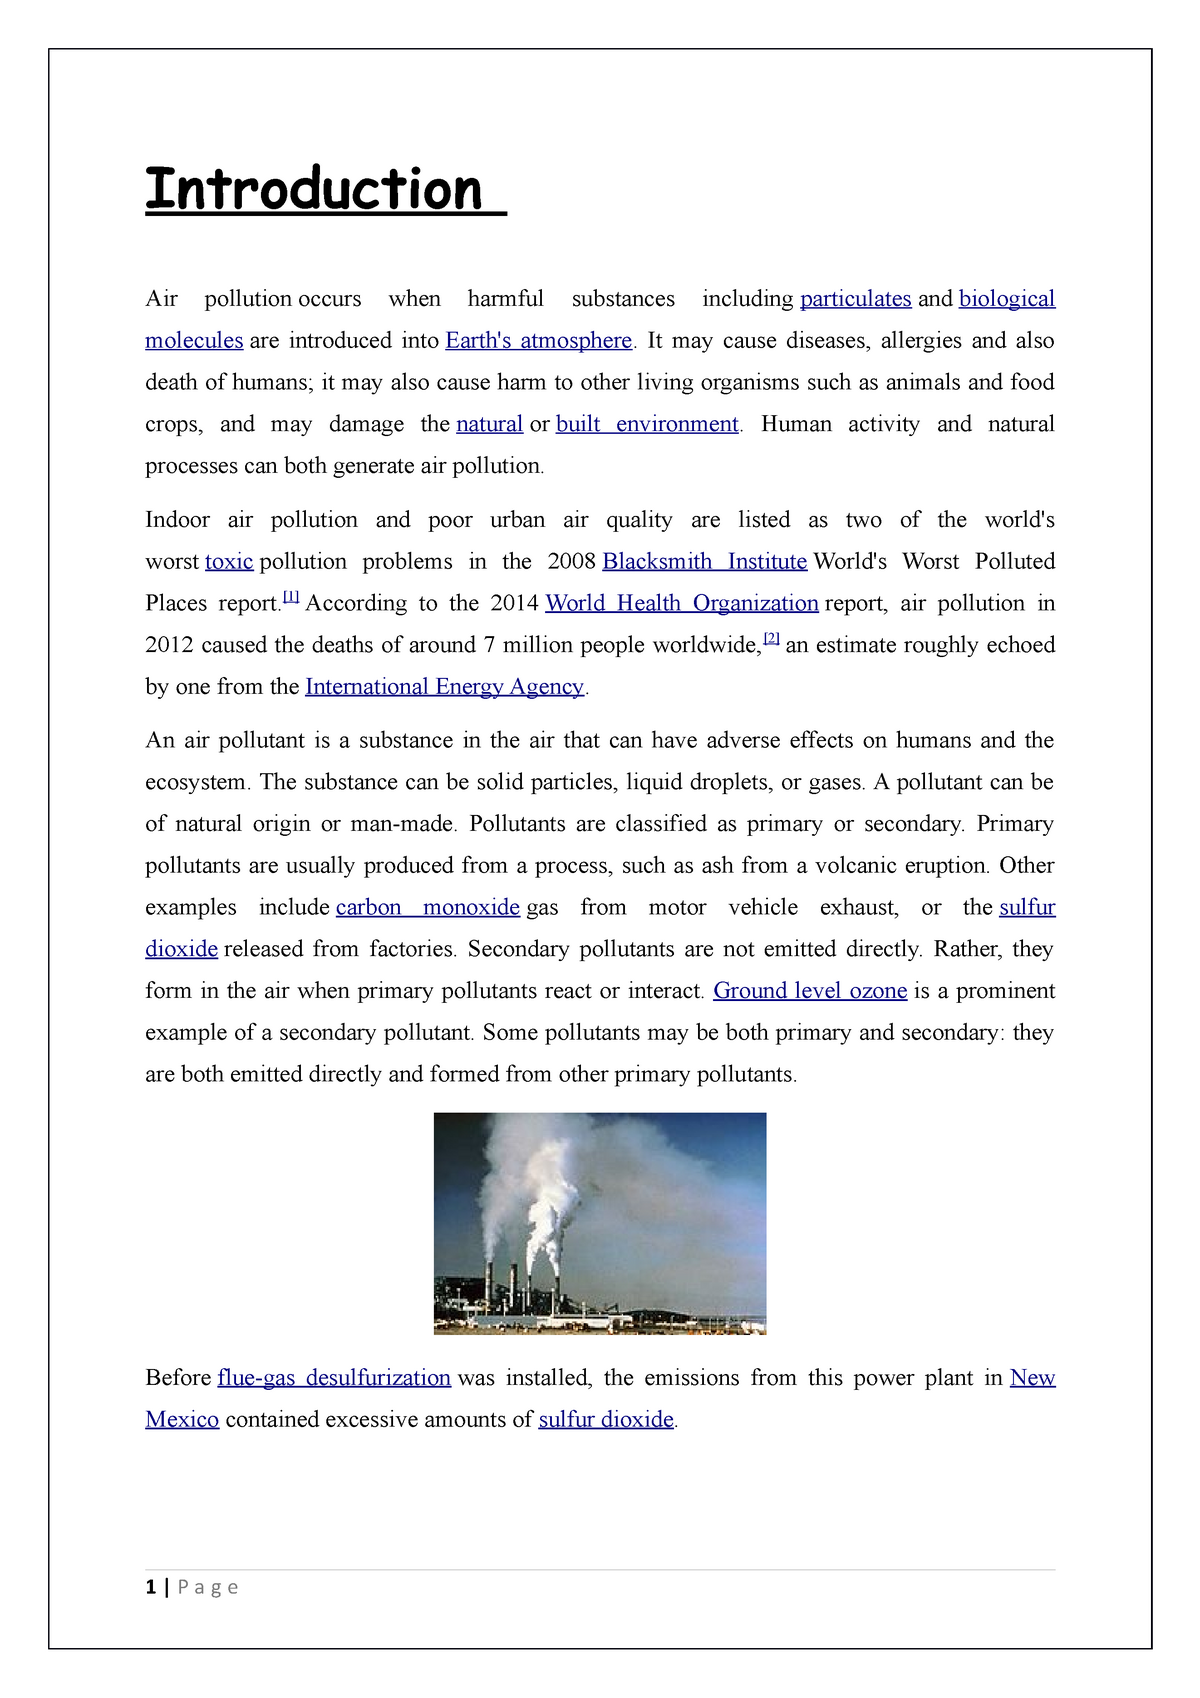 assignment on air pollution introduction